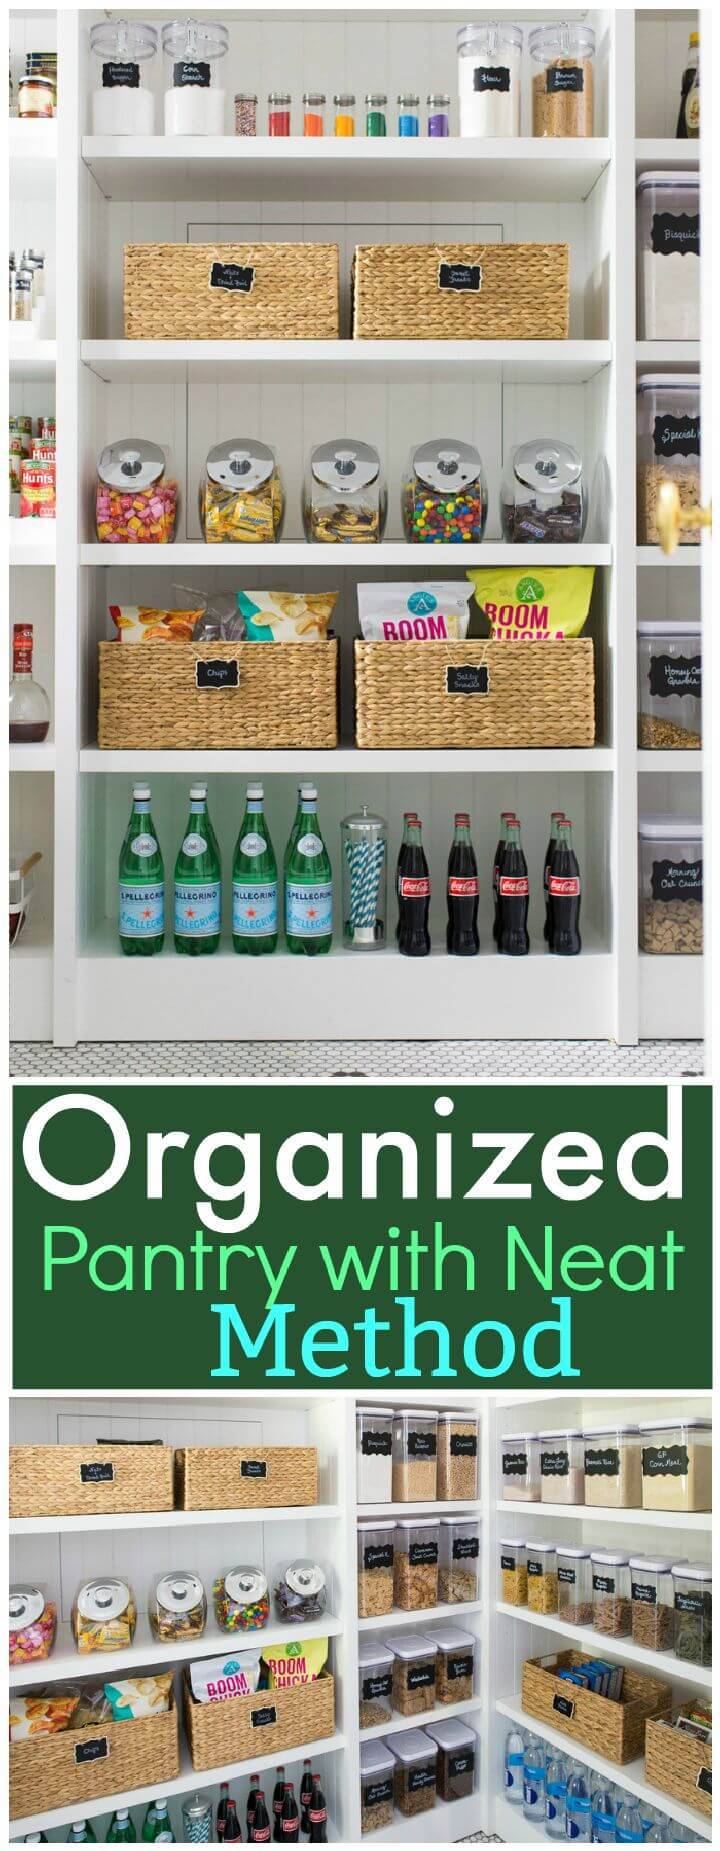 Organized Pantry with Neat Method